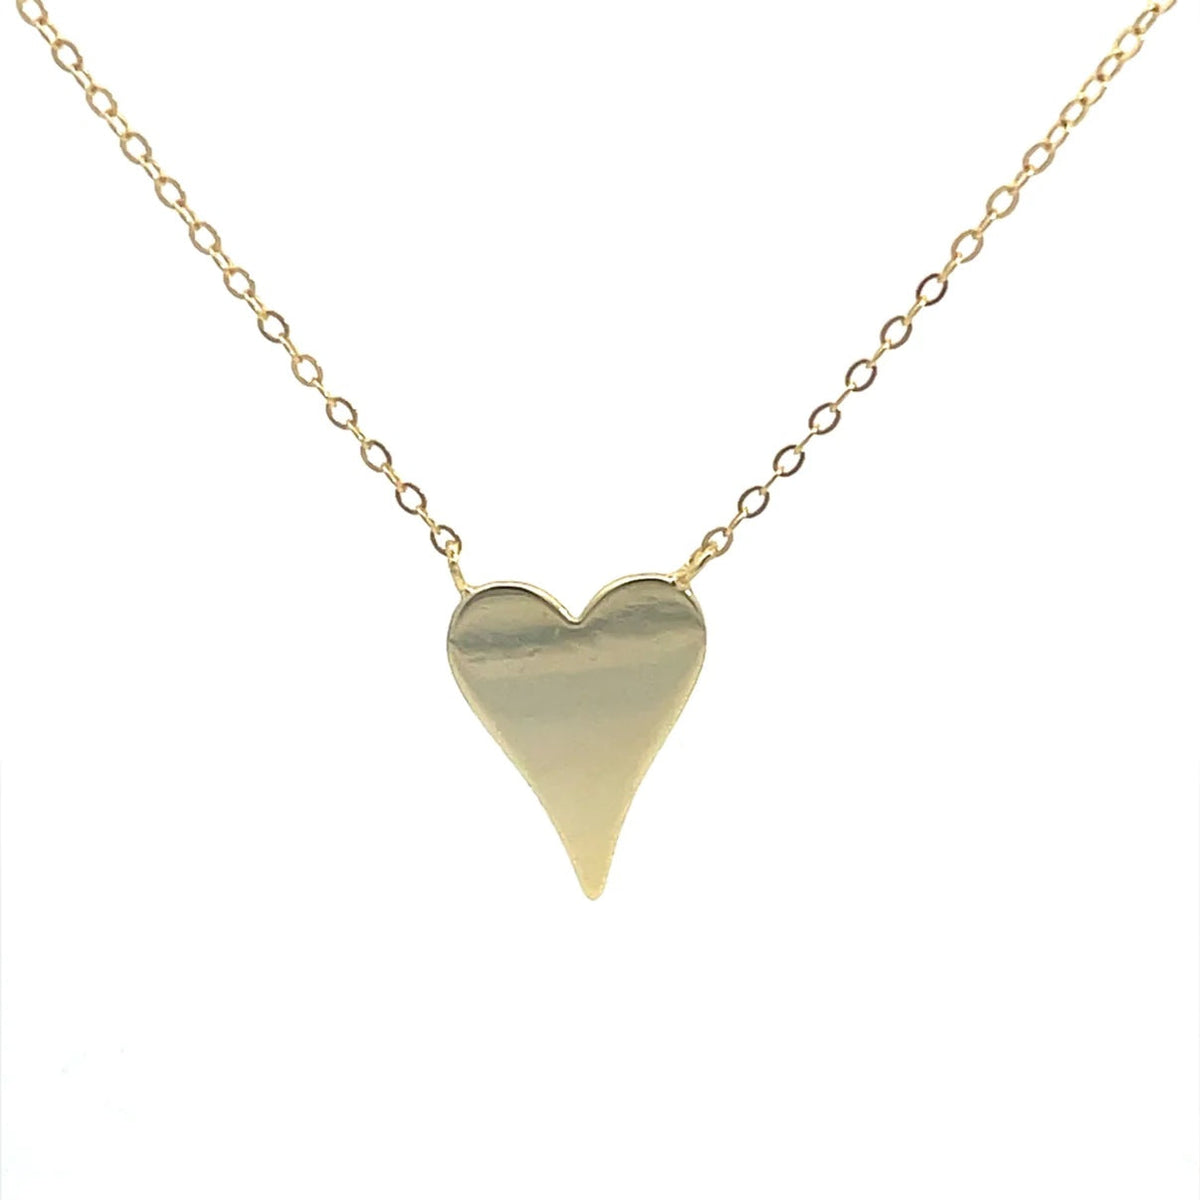 Large Heart Necklace, 14K Gold Plated Sterling Silver Necklace